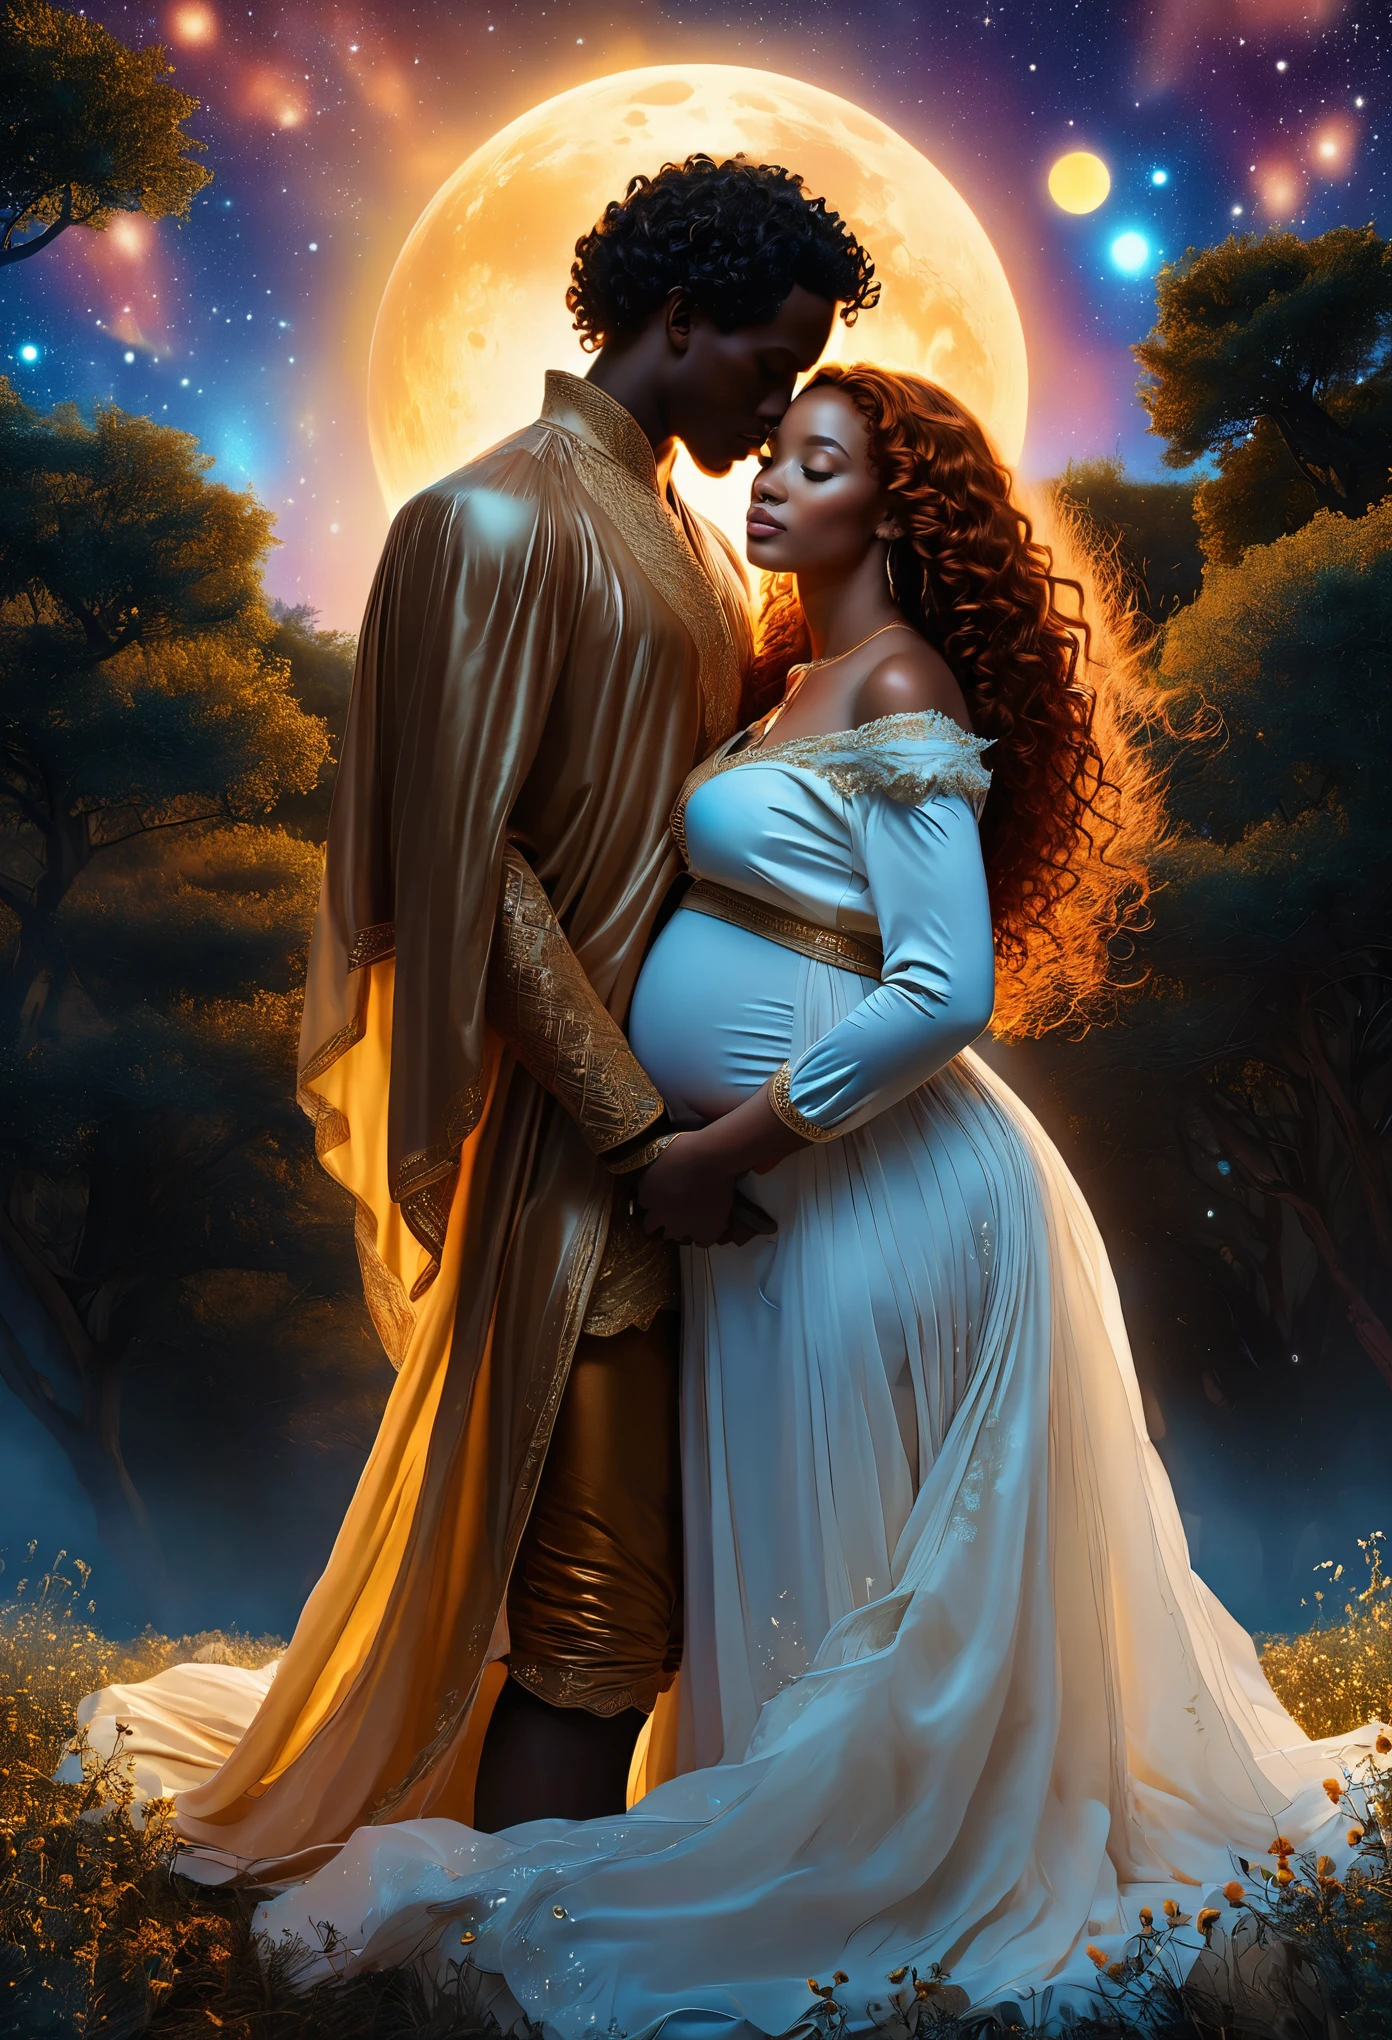 In a celestial landscape, two people dressed luxuous, they are all darkskin,  (((one darkskin ginger hair pregnant1.5 woman))) and (((one short brown hair woman))), (they are two différent and separate couple1.2). (Two couple of four people:1.2). The first couple is a darskin duke long dark curly hair with a ginger long hair pregnant woman. The second couple is a darkskin duke curly dark hair with a short brown hair woman
